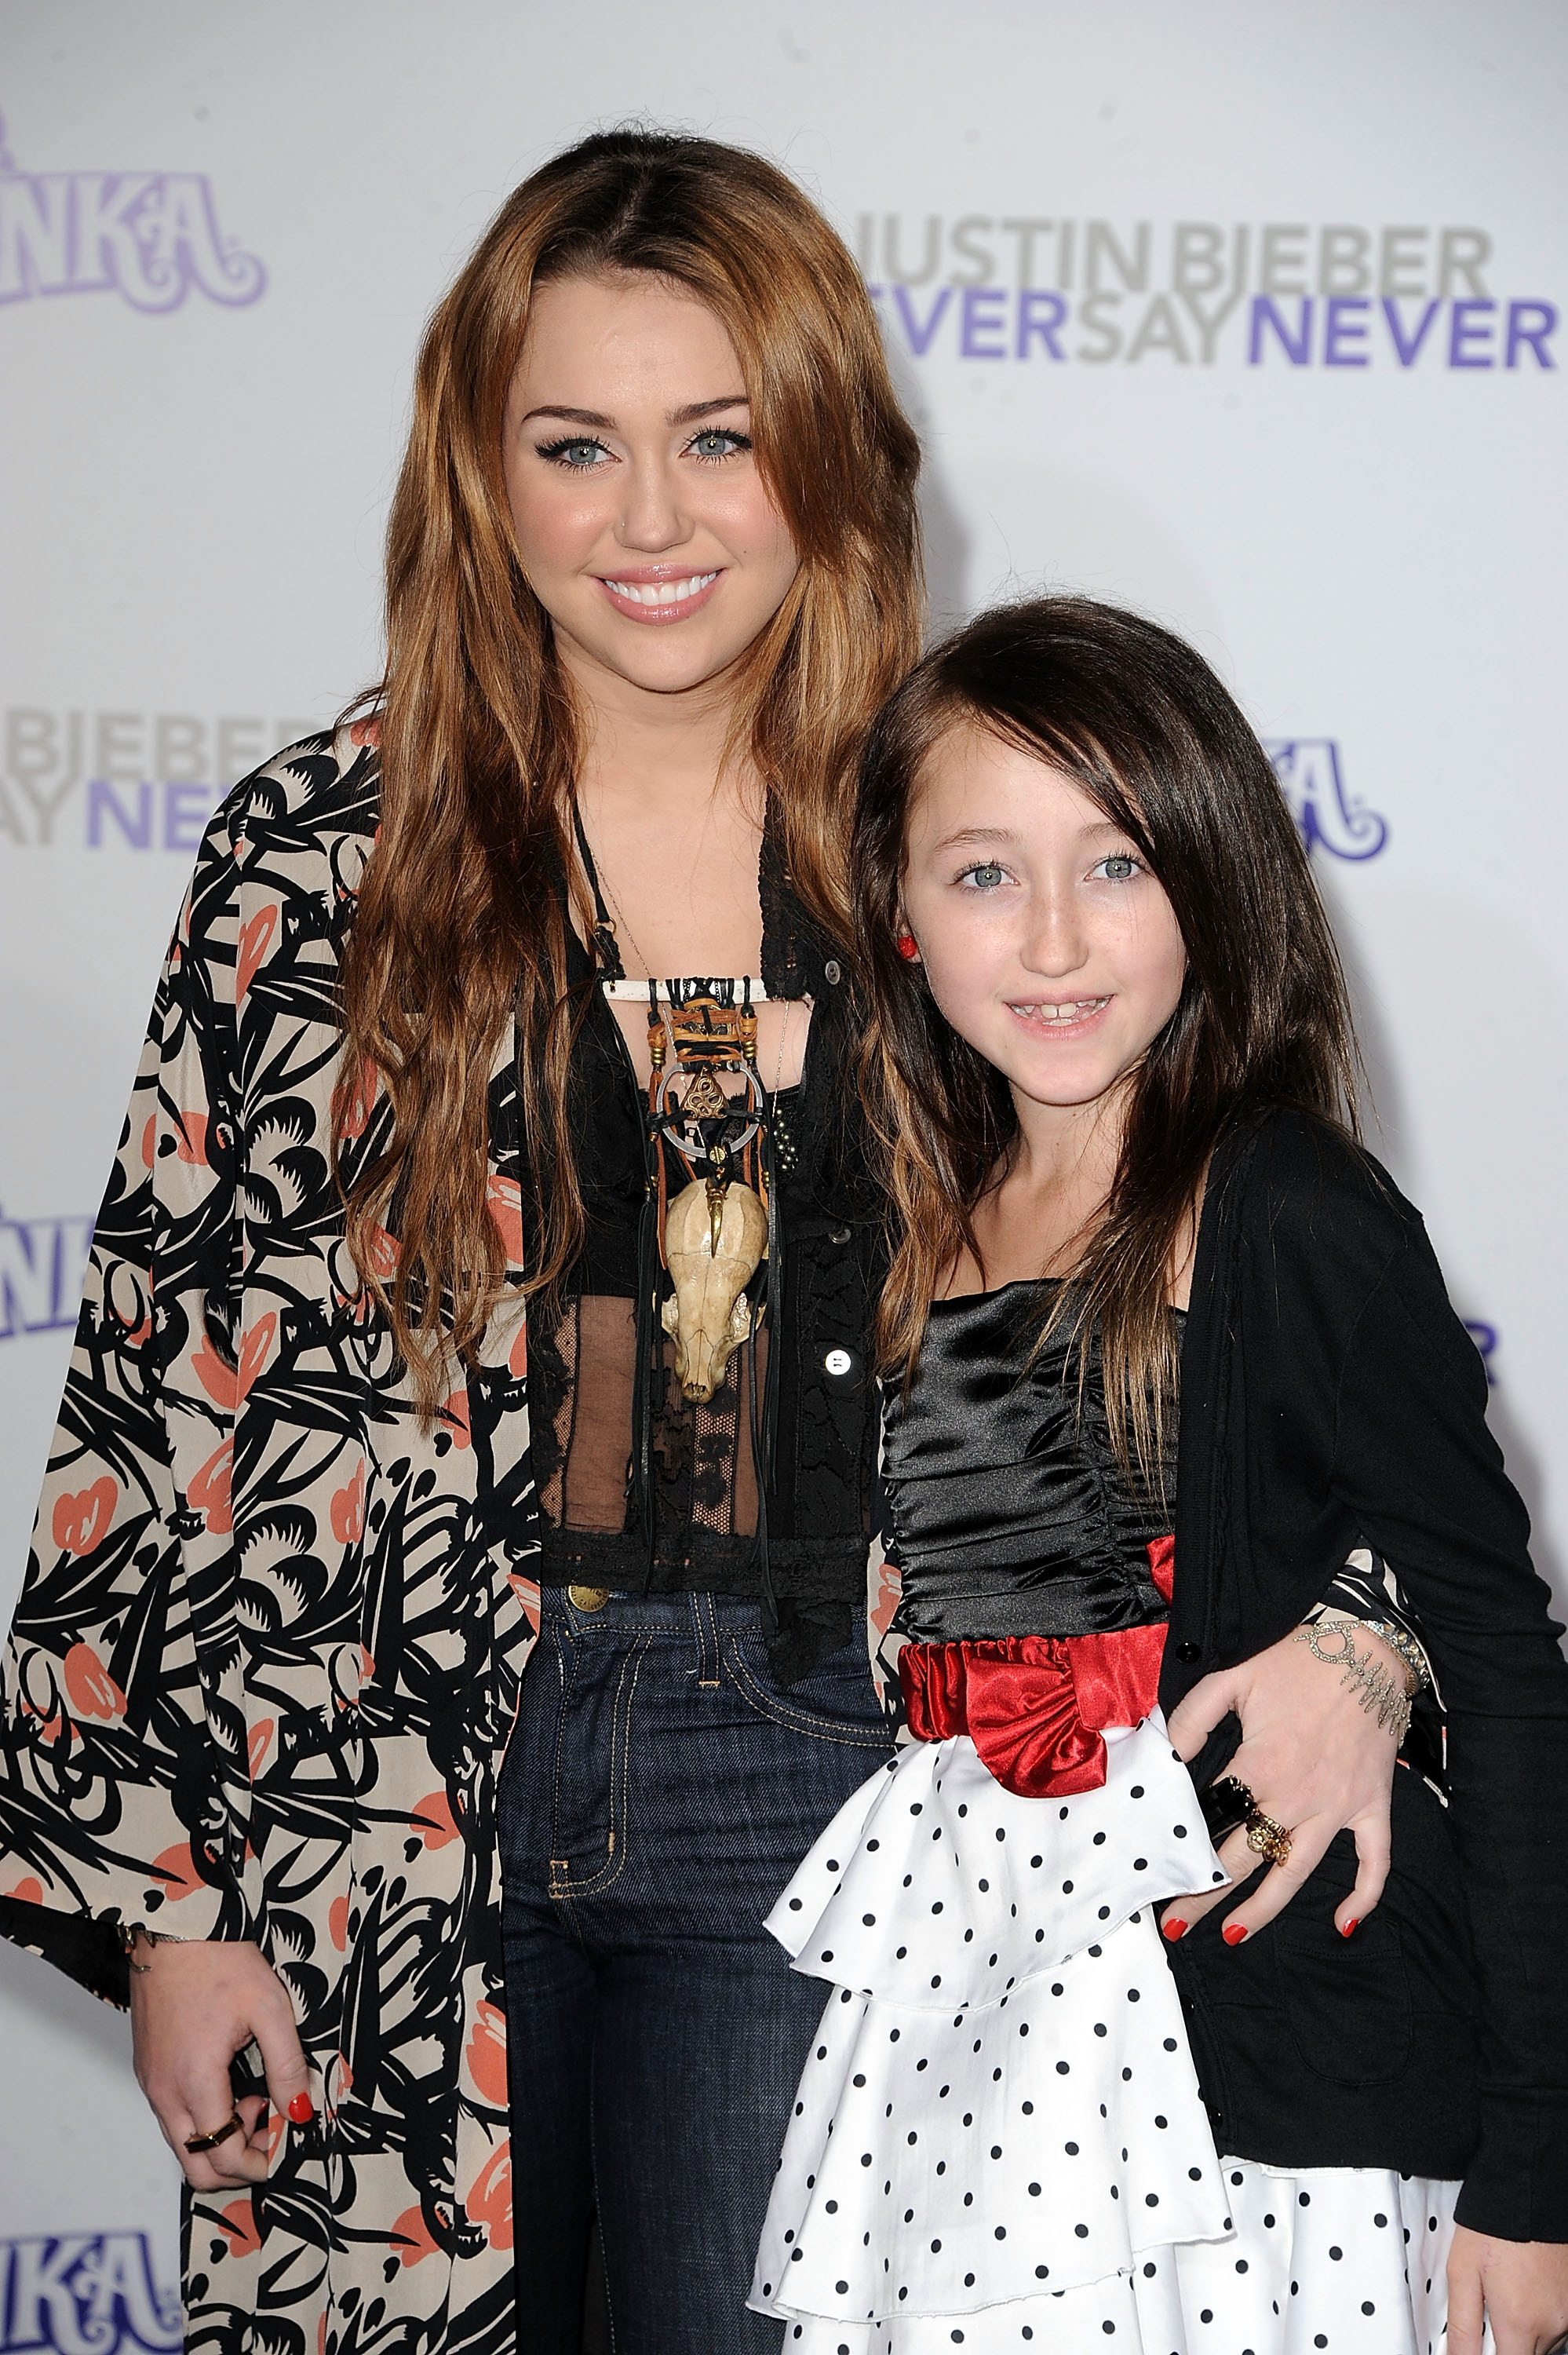 Noah, as a child, and Miley at a media event